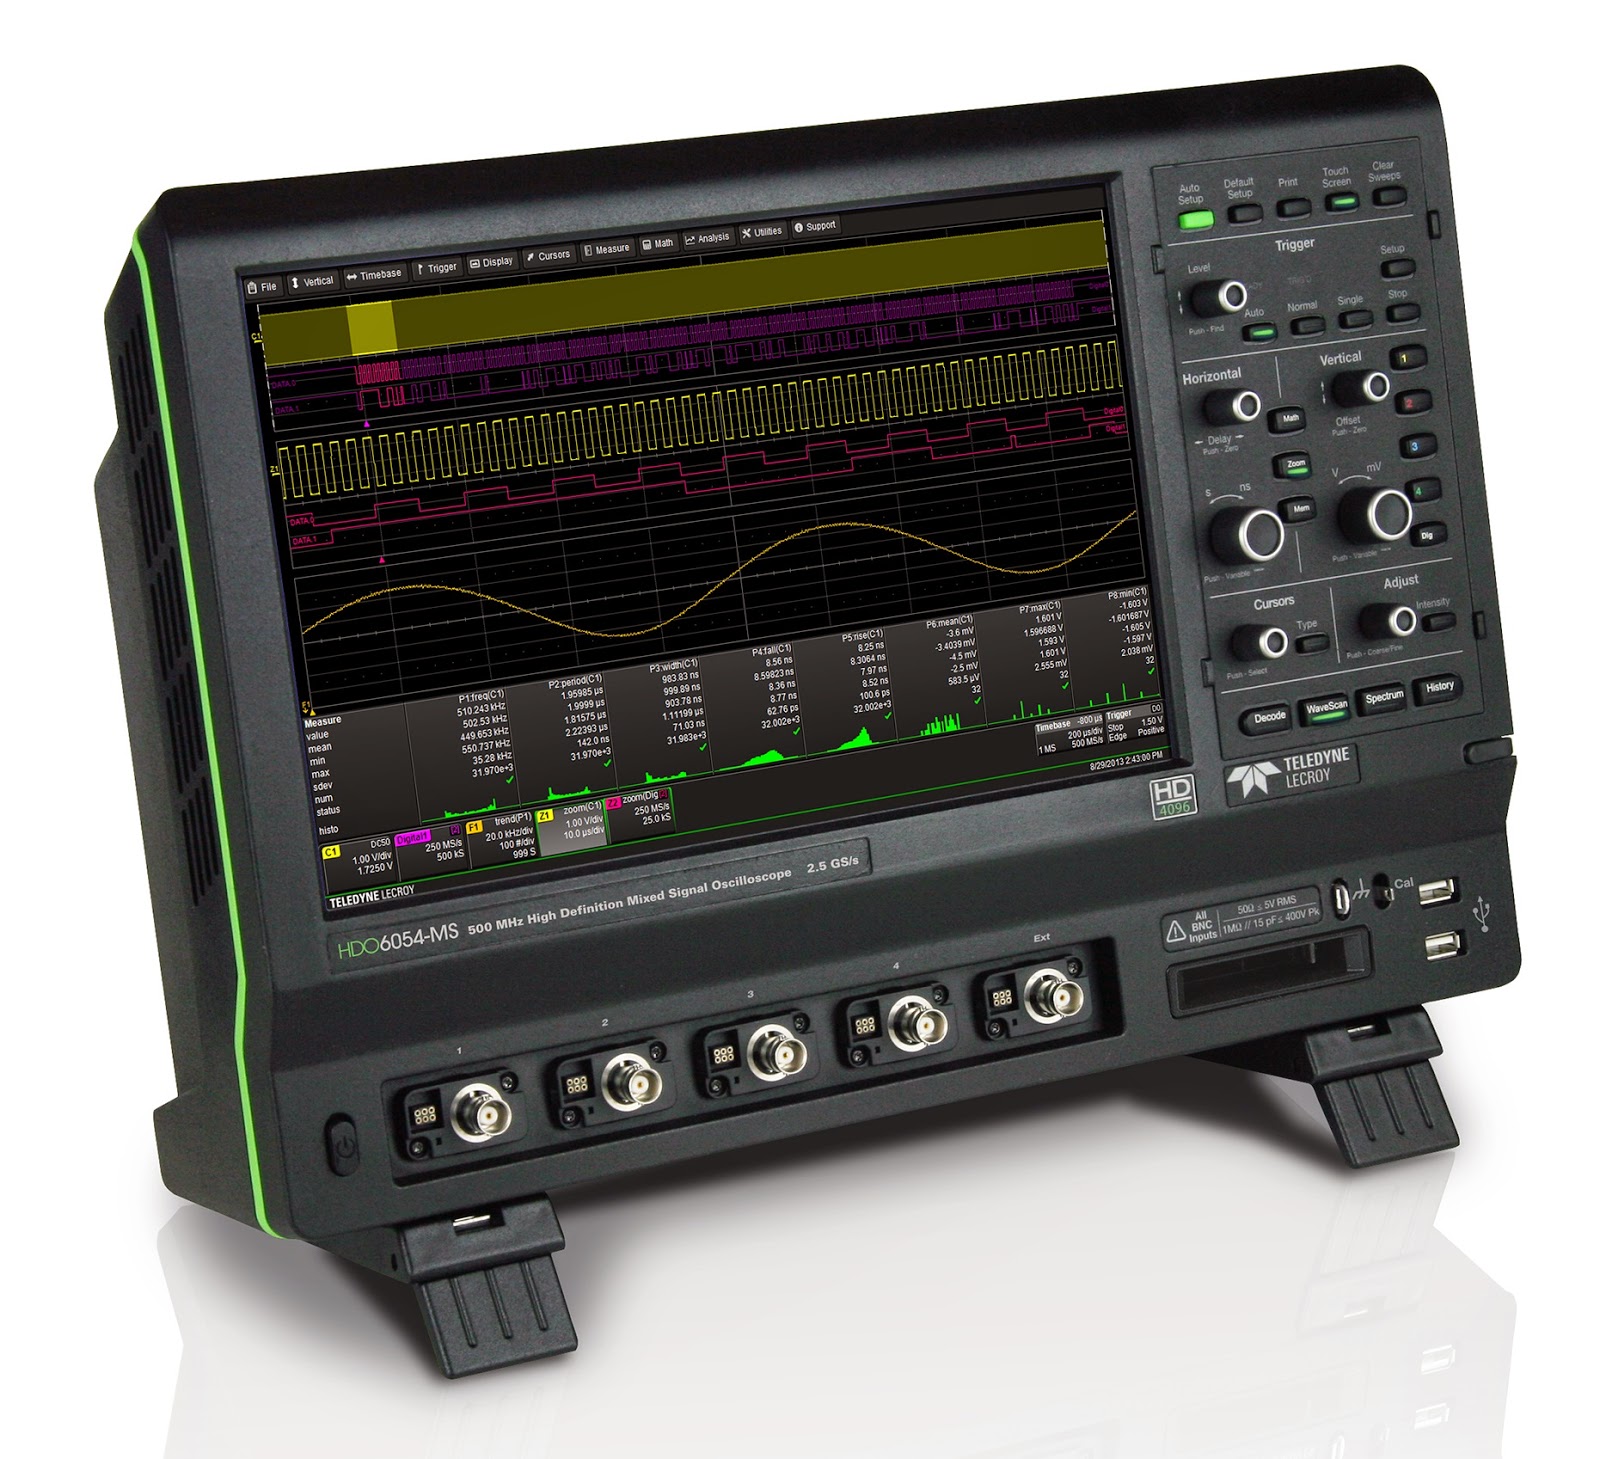 An oscilloscope such as Teledyne LeCroy's HDO6054-MS serves a very broad range of applications